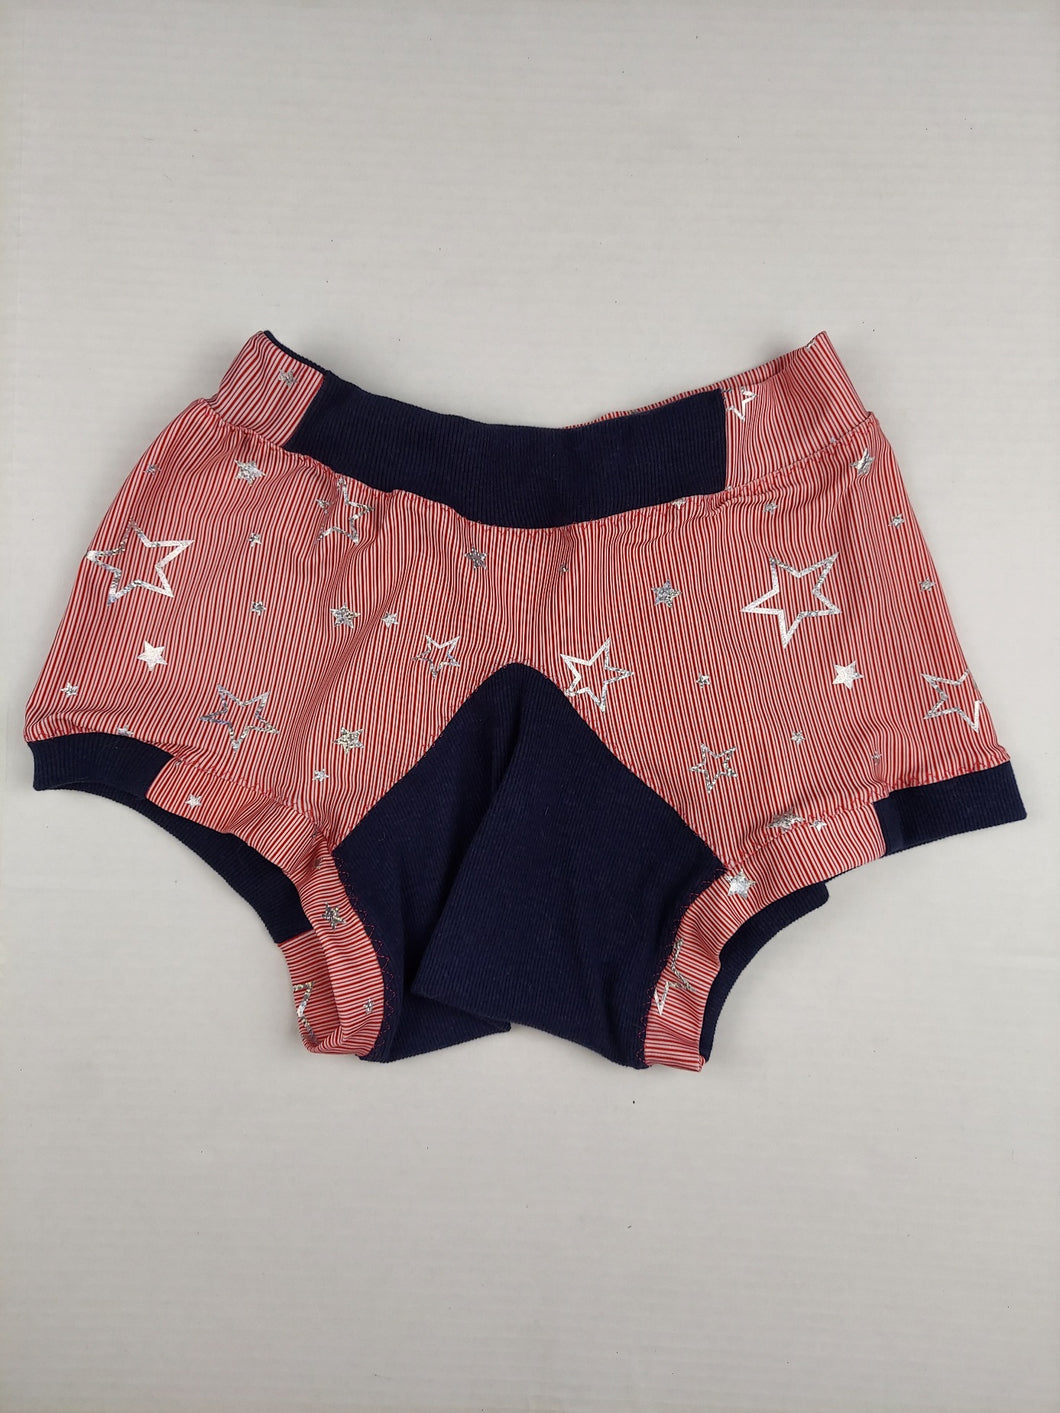 LARGE Stars and stripes micro bloomers